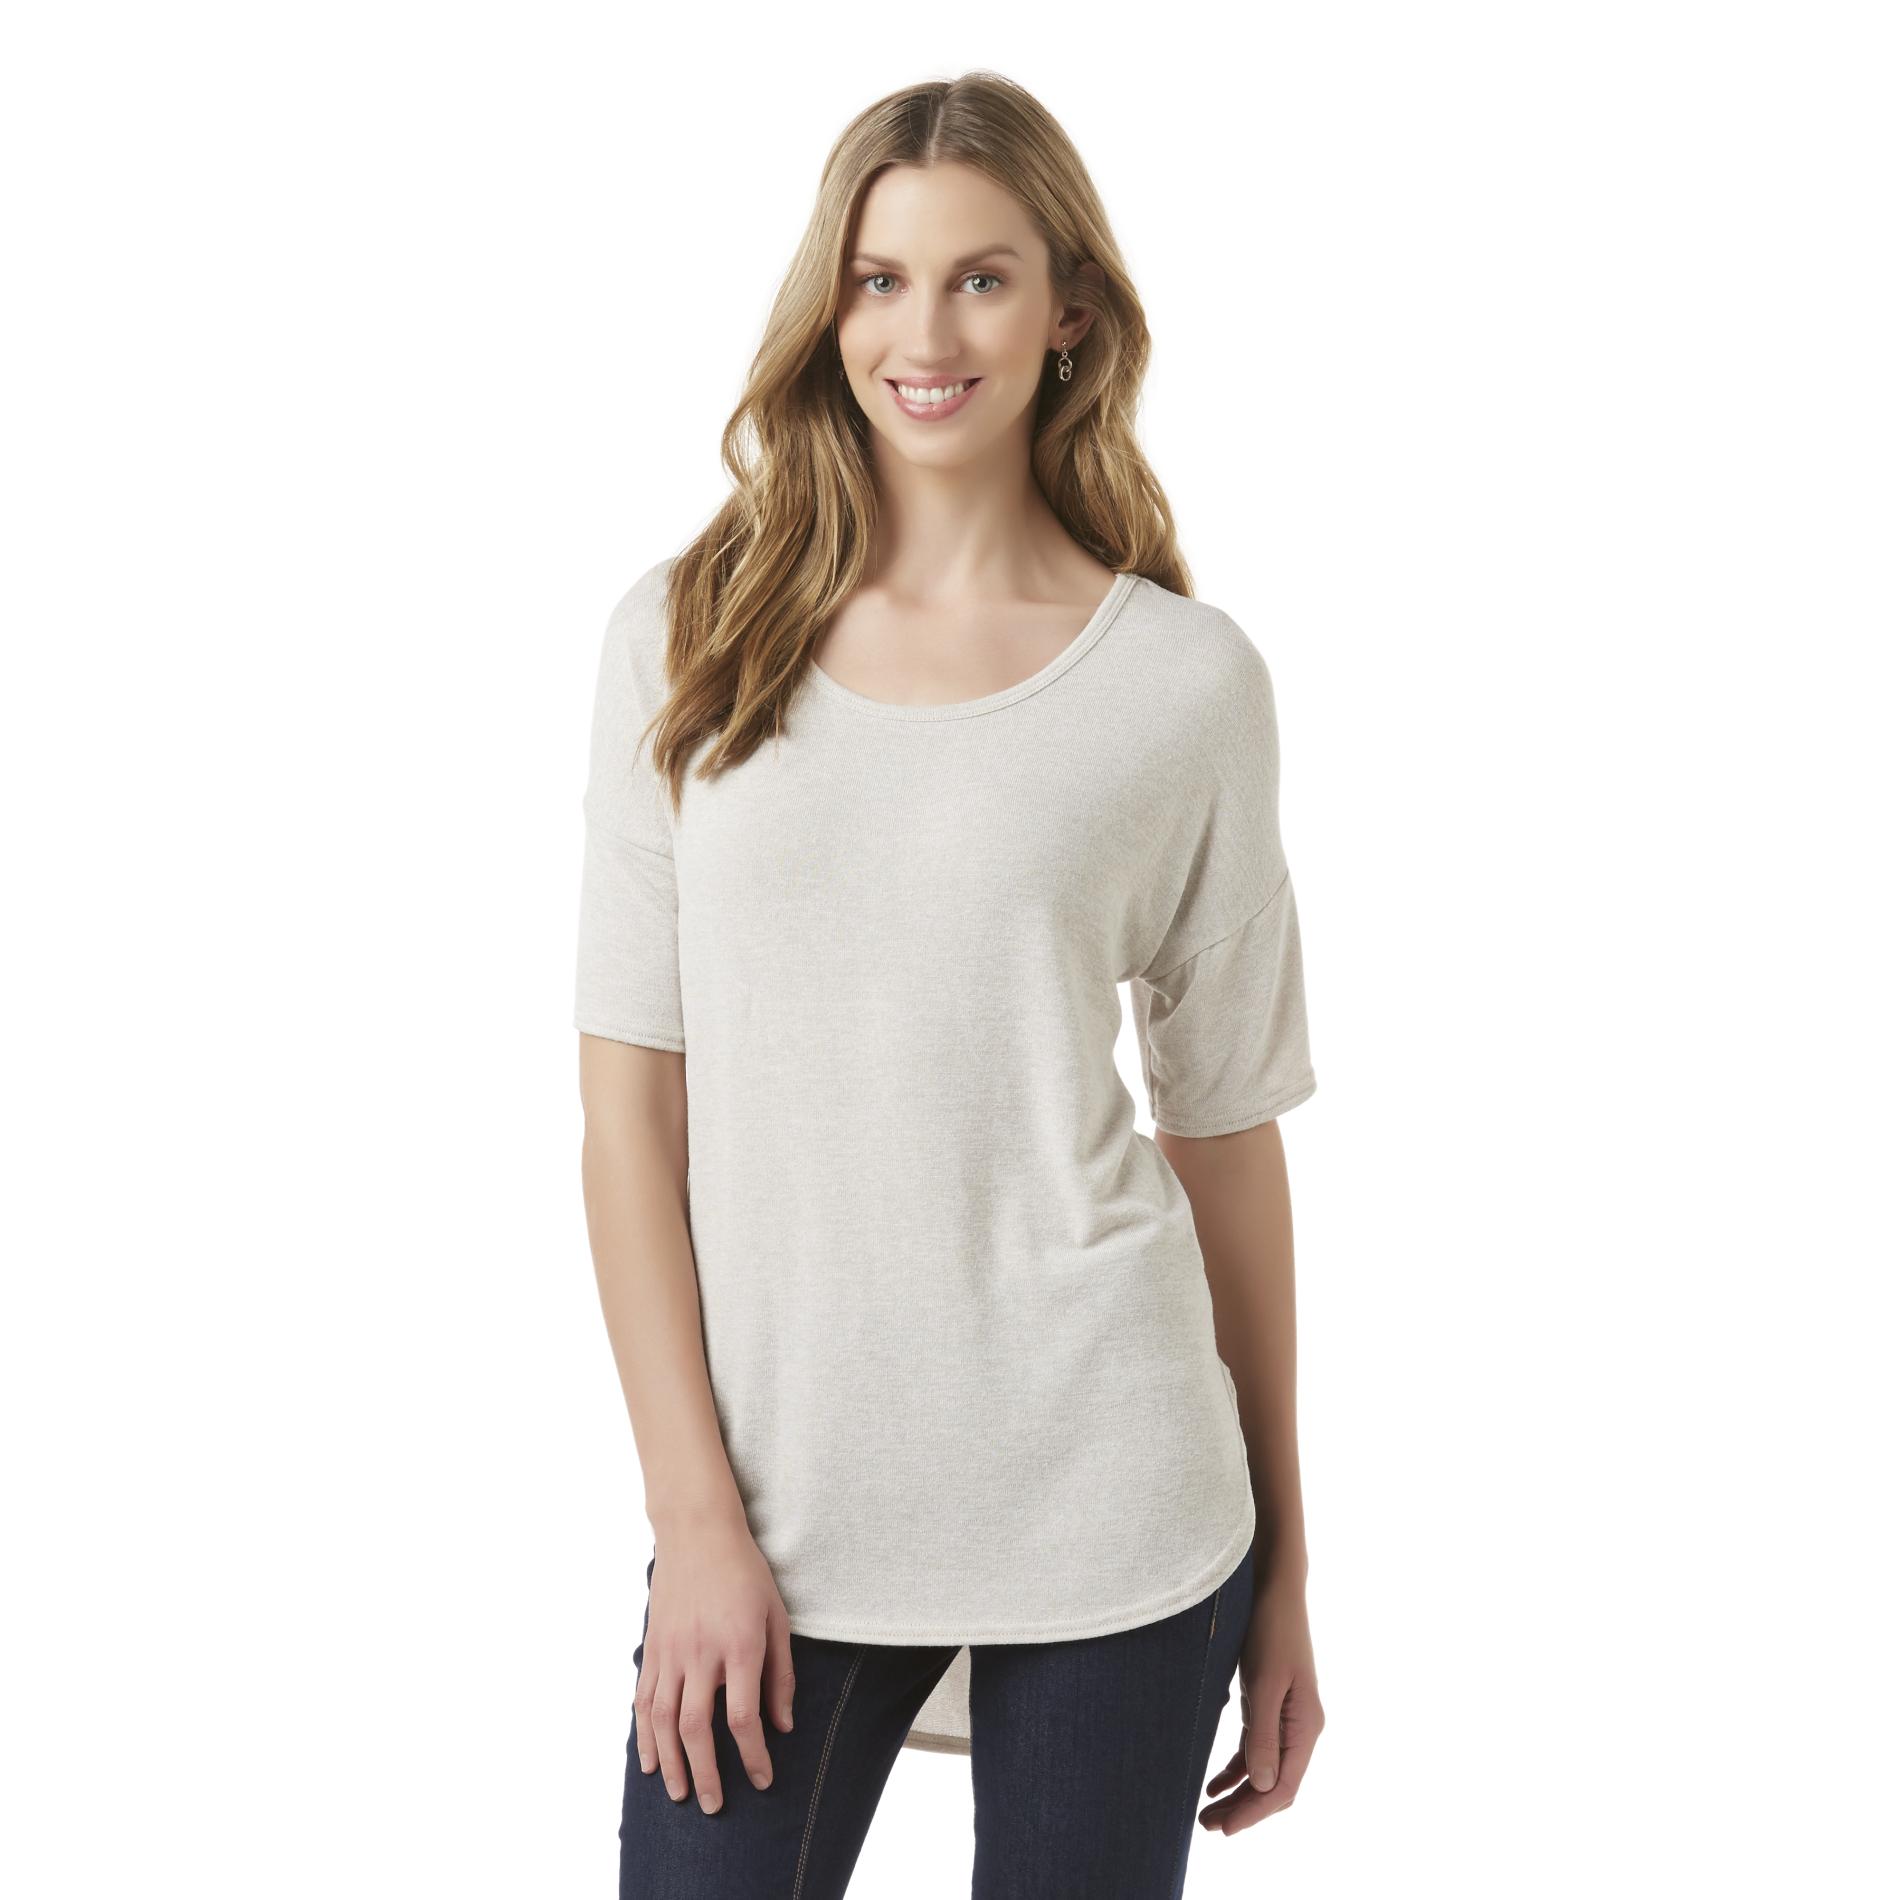 Simply Styled Women's Drop Shoulder Sweater